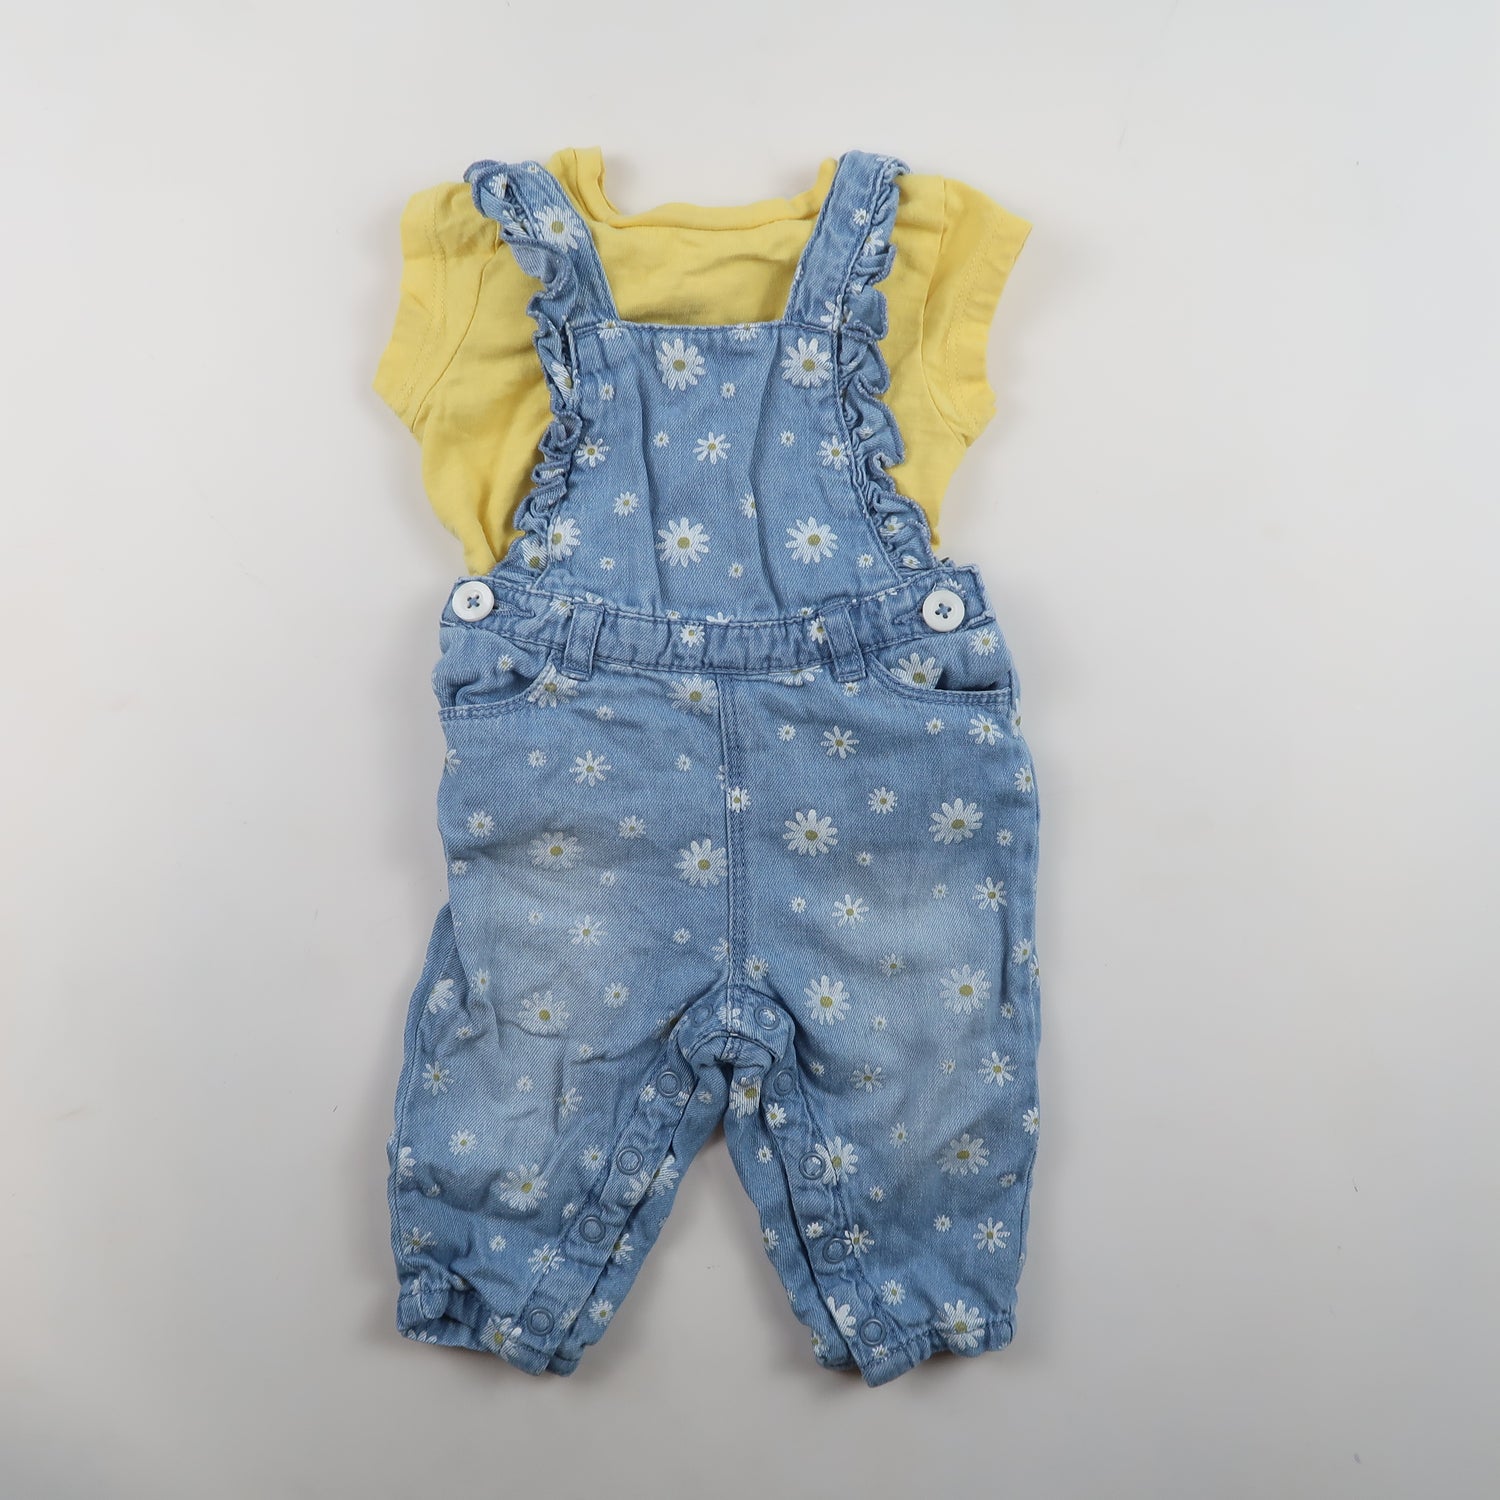 George - Outfit Set (3-6M)